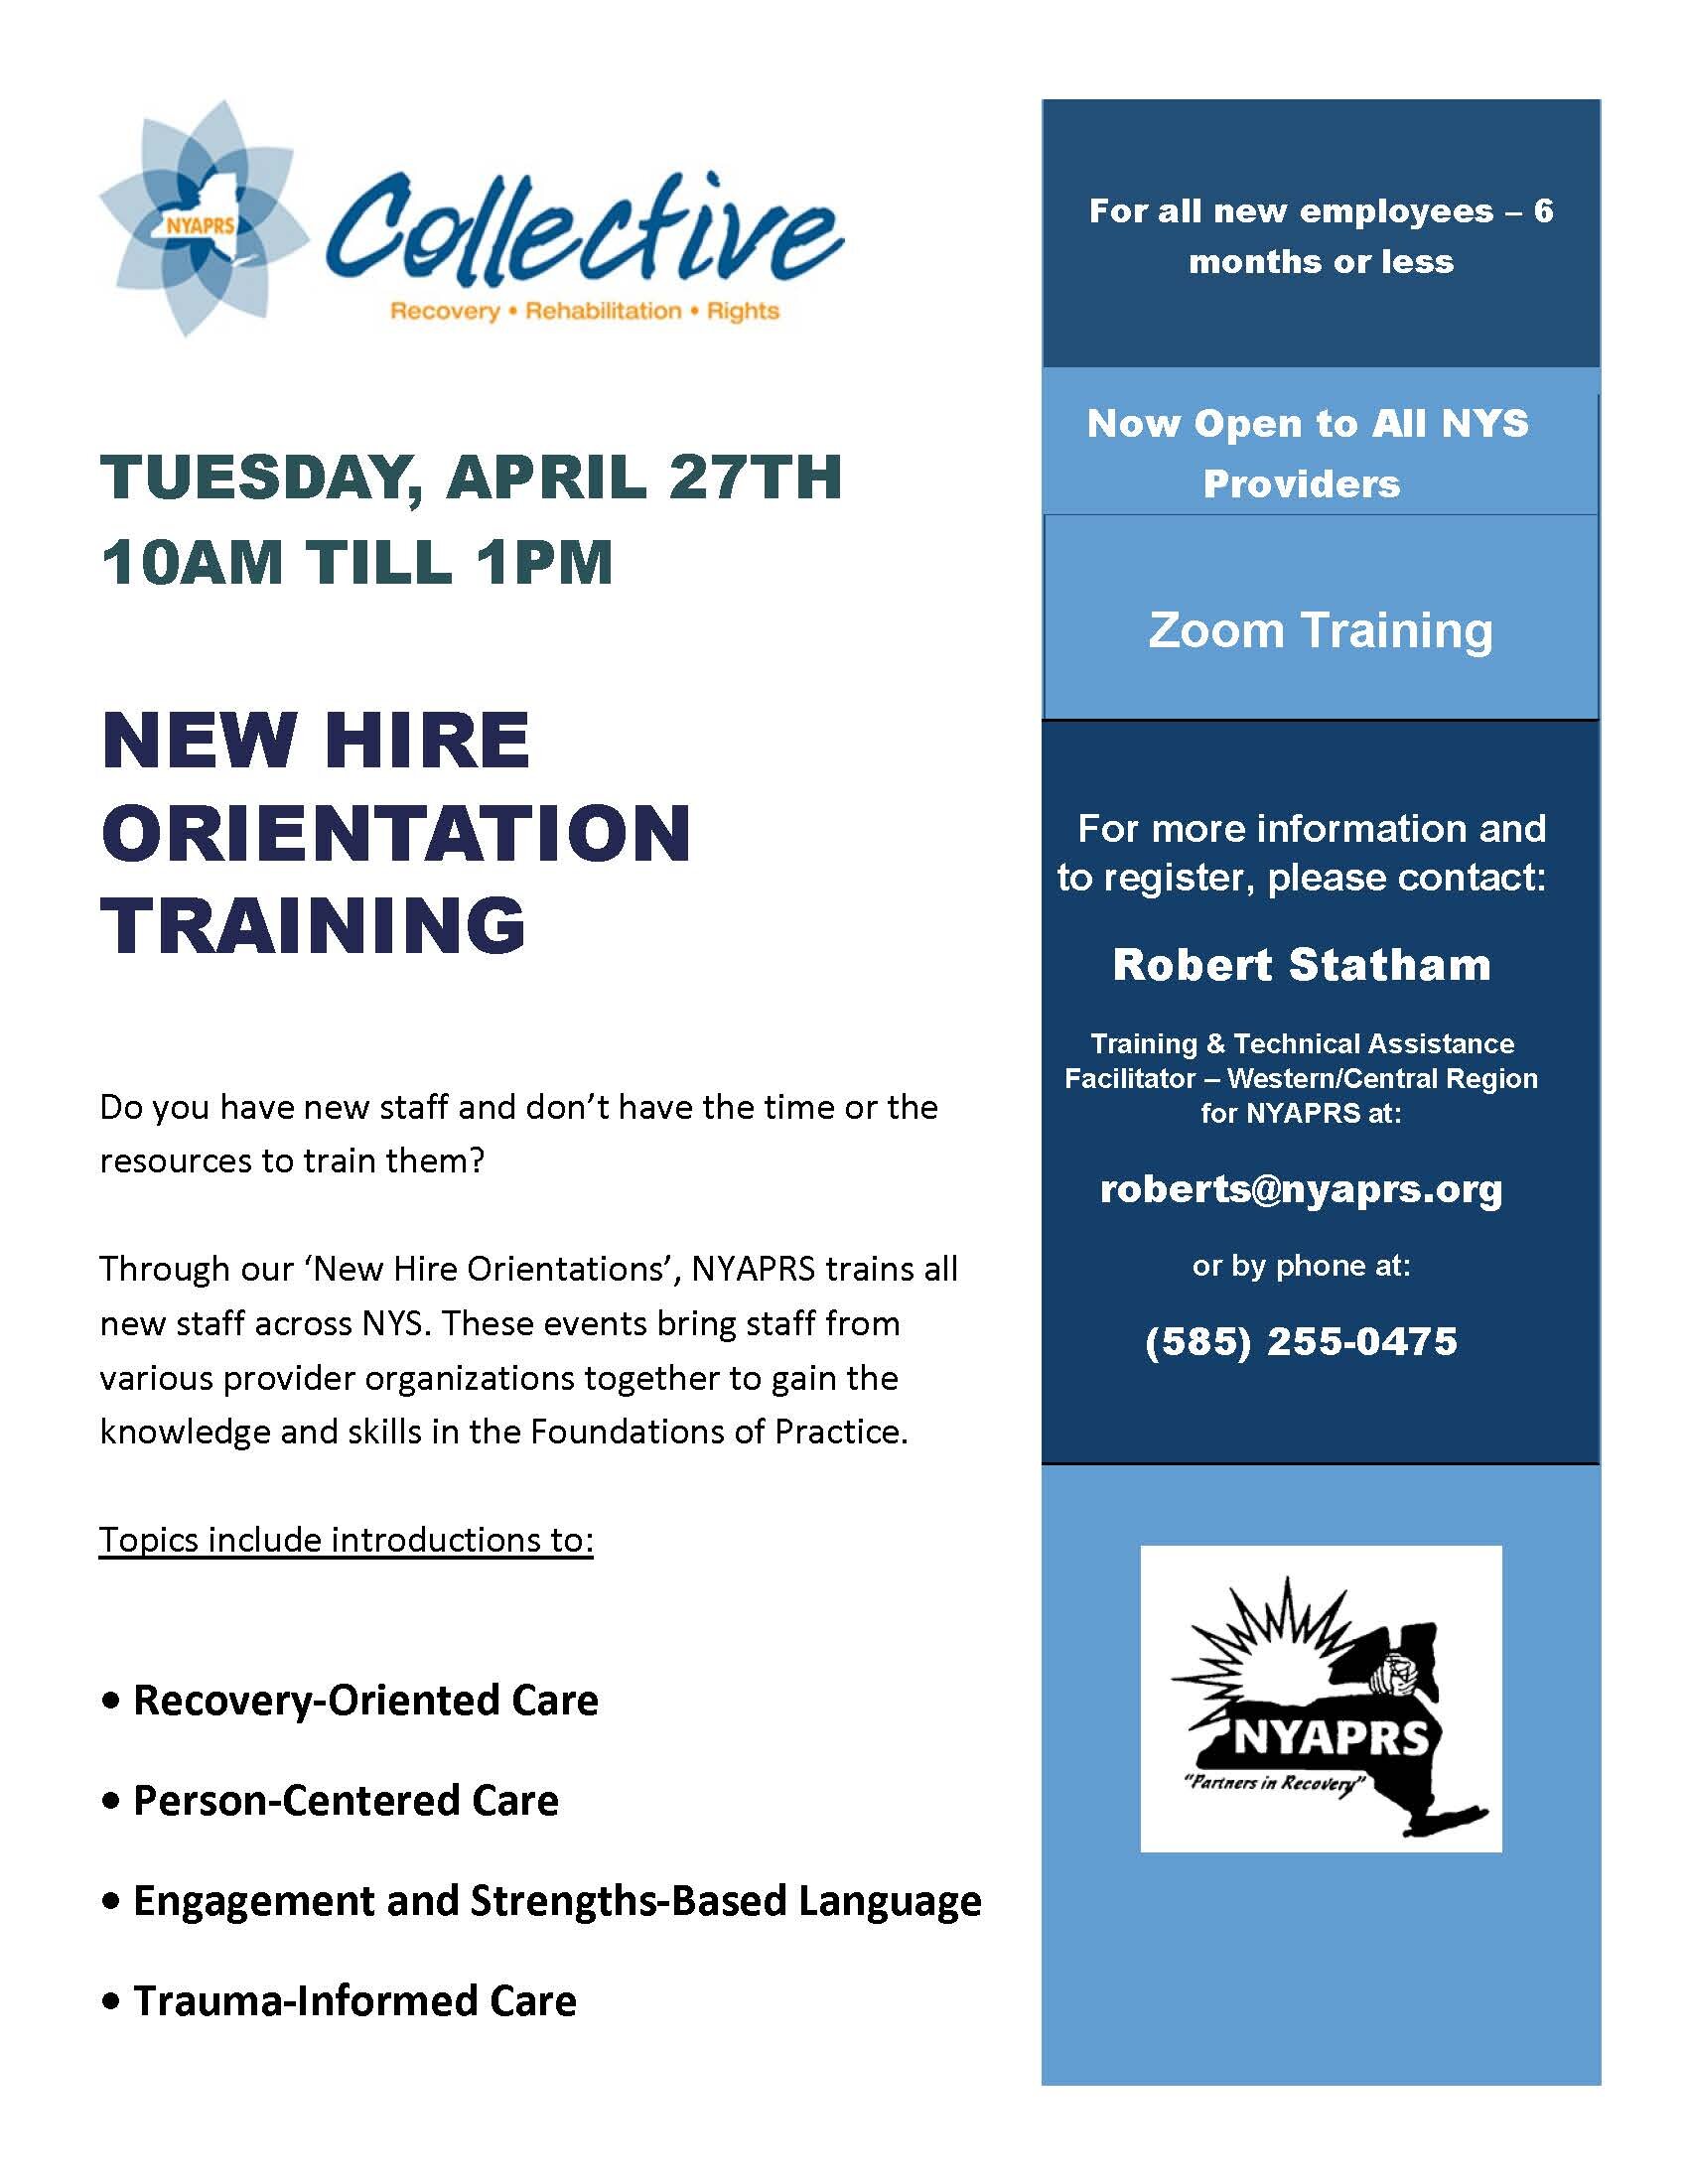 New Hire Orientation Flyer for NYS.jpg